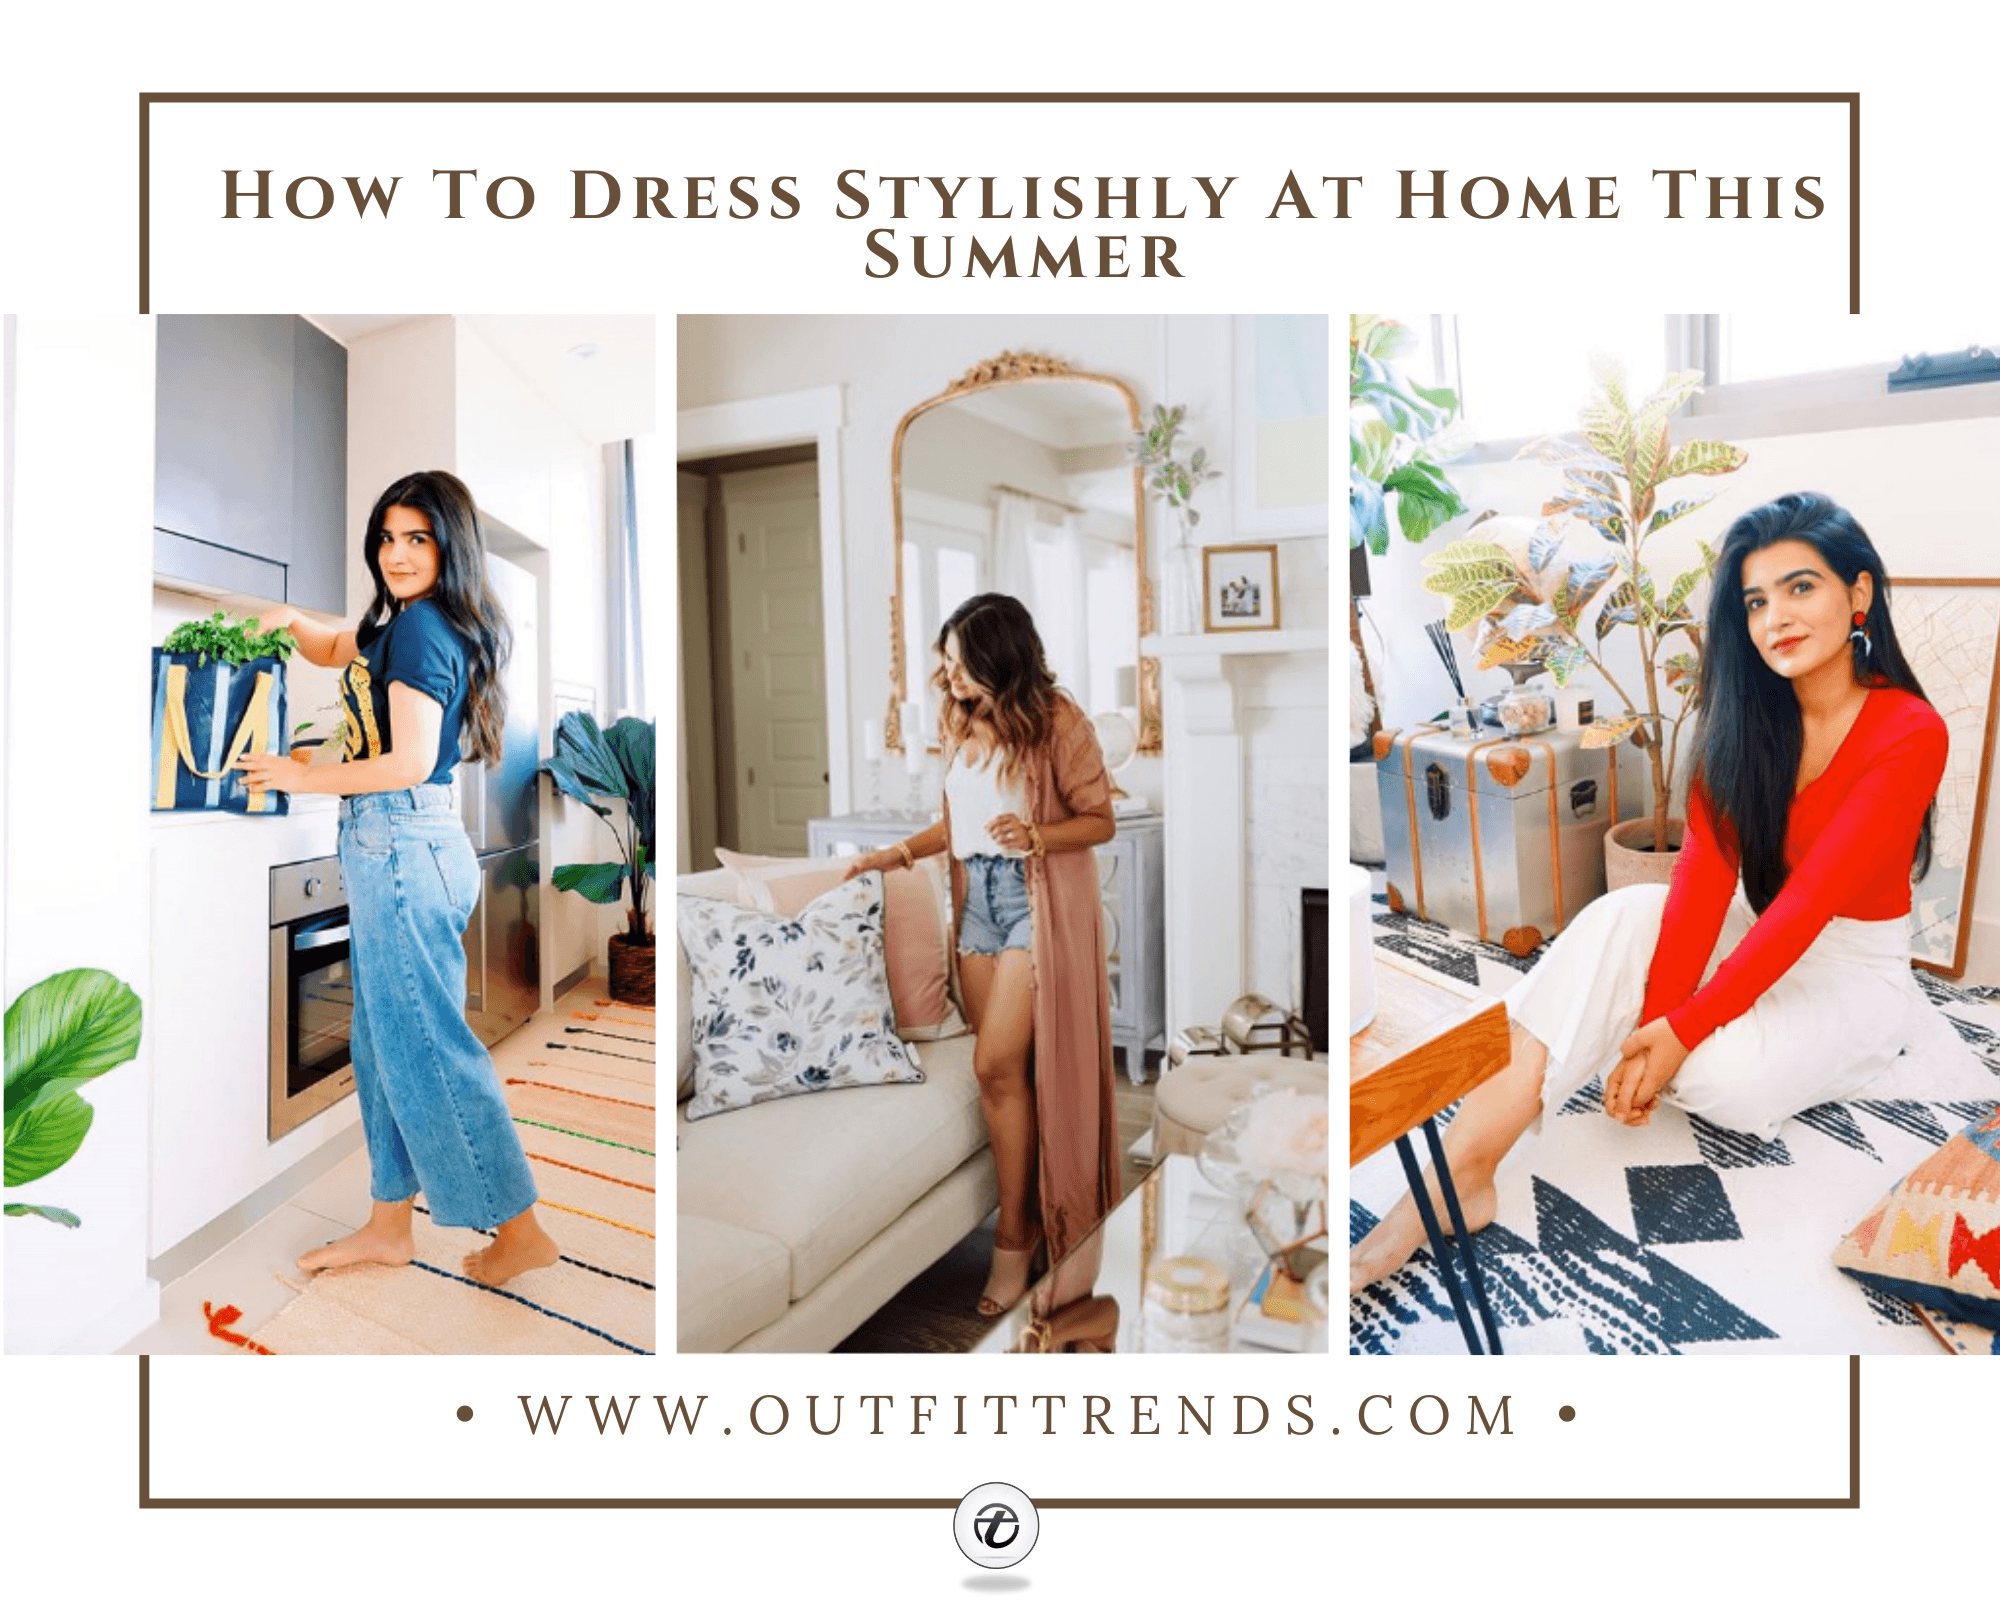 Girls Summer Home Wear-21 Best Ideas on What to Wear at Home